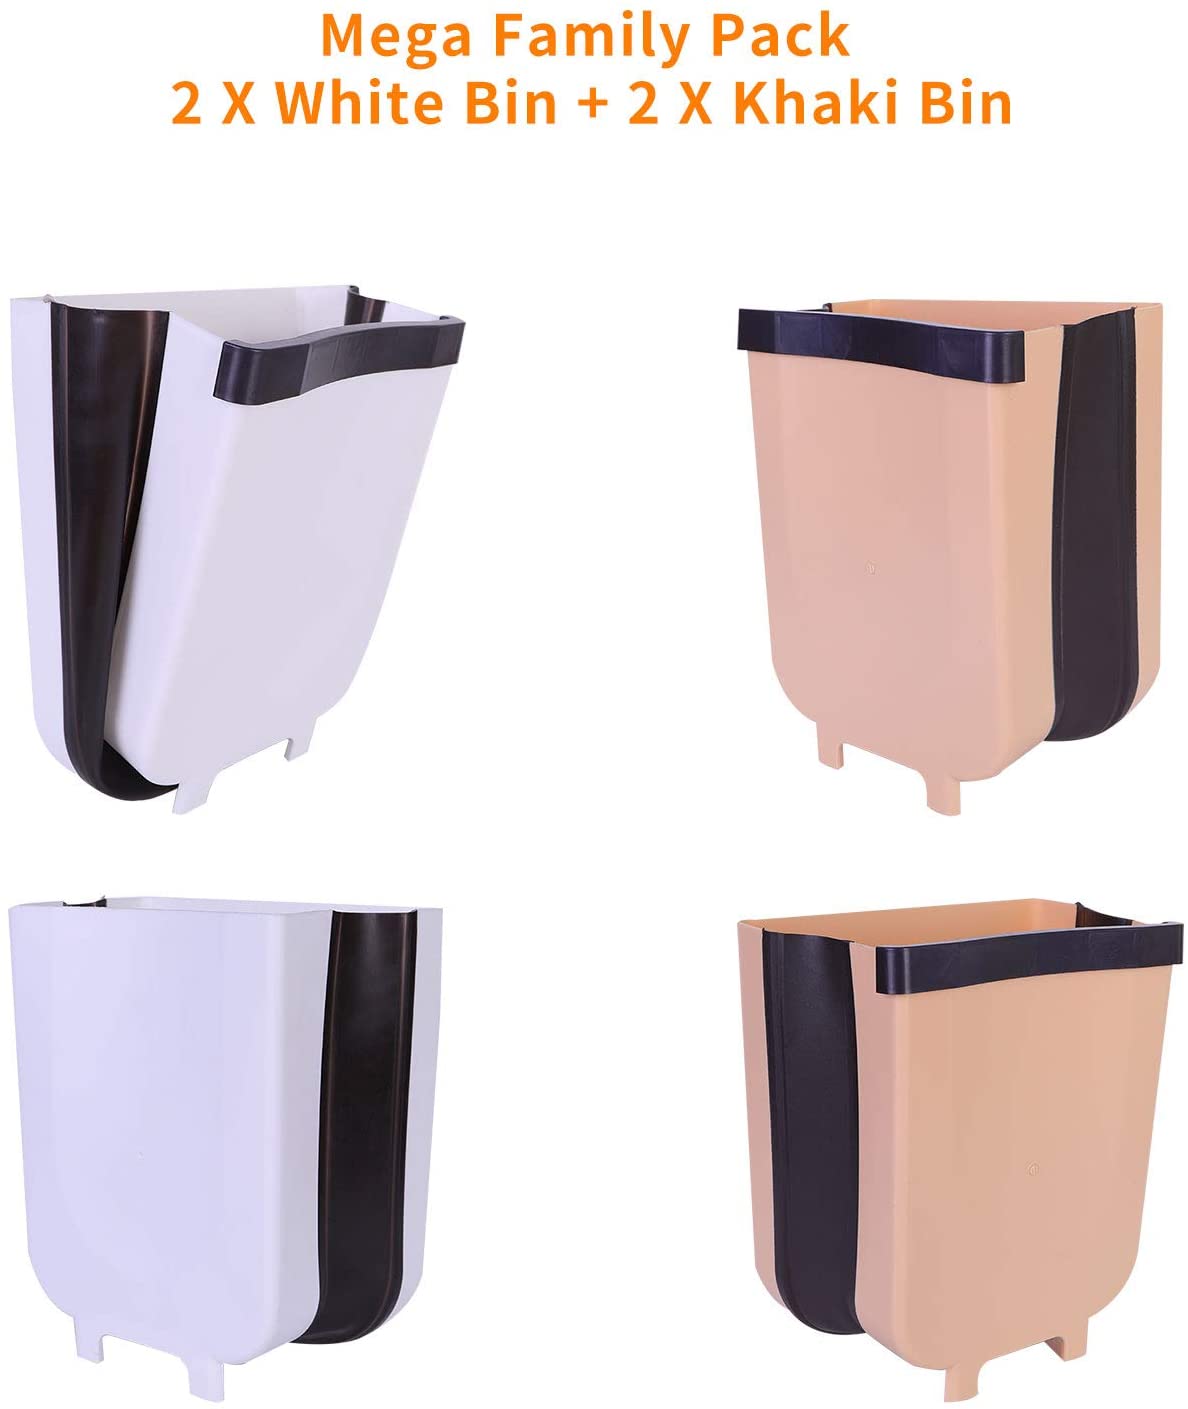 Aiwanto 4 Pack Hanging Trash Can Trash Box  Foldable  Cabinet Garbage Bin Kitchen Bathroom Bedroom Office Drawer Car Trash Dust Bin (2 White and 2 Brown)